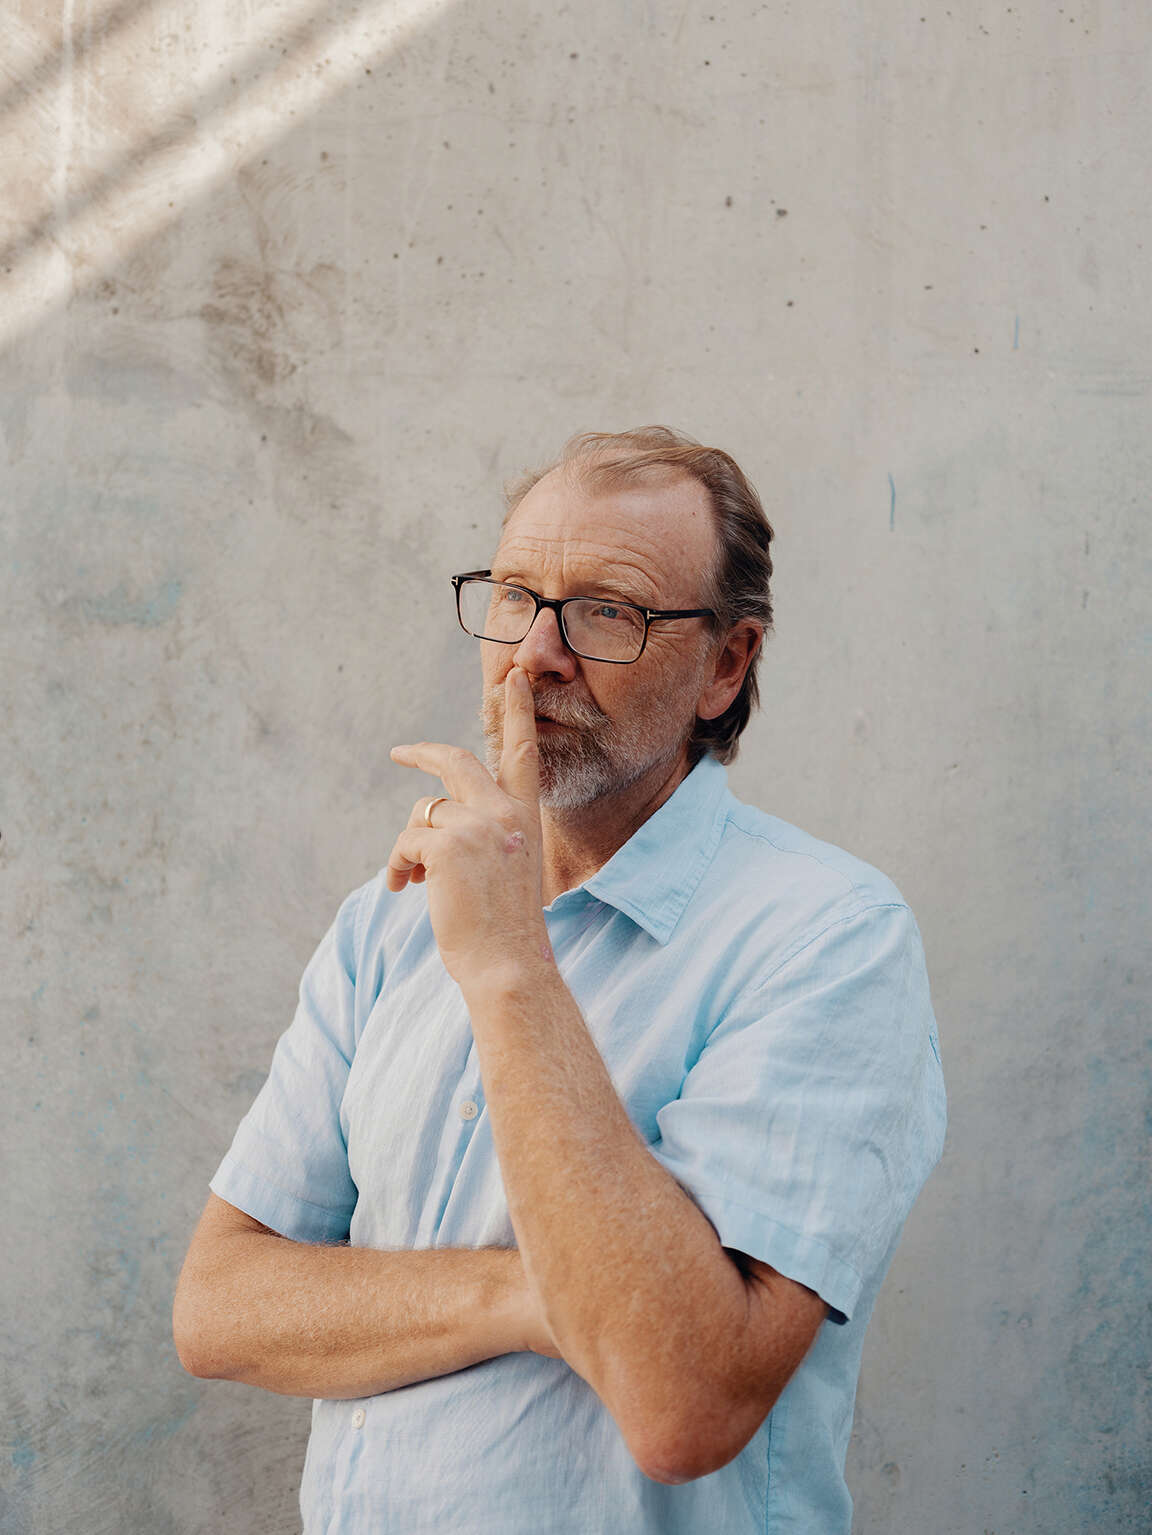 George Saunders interview: "What I regret most in my life are failures of kindness